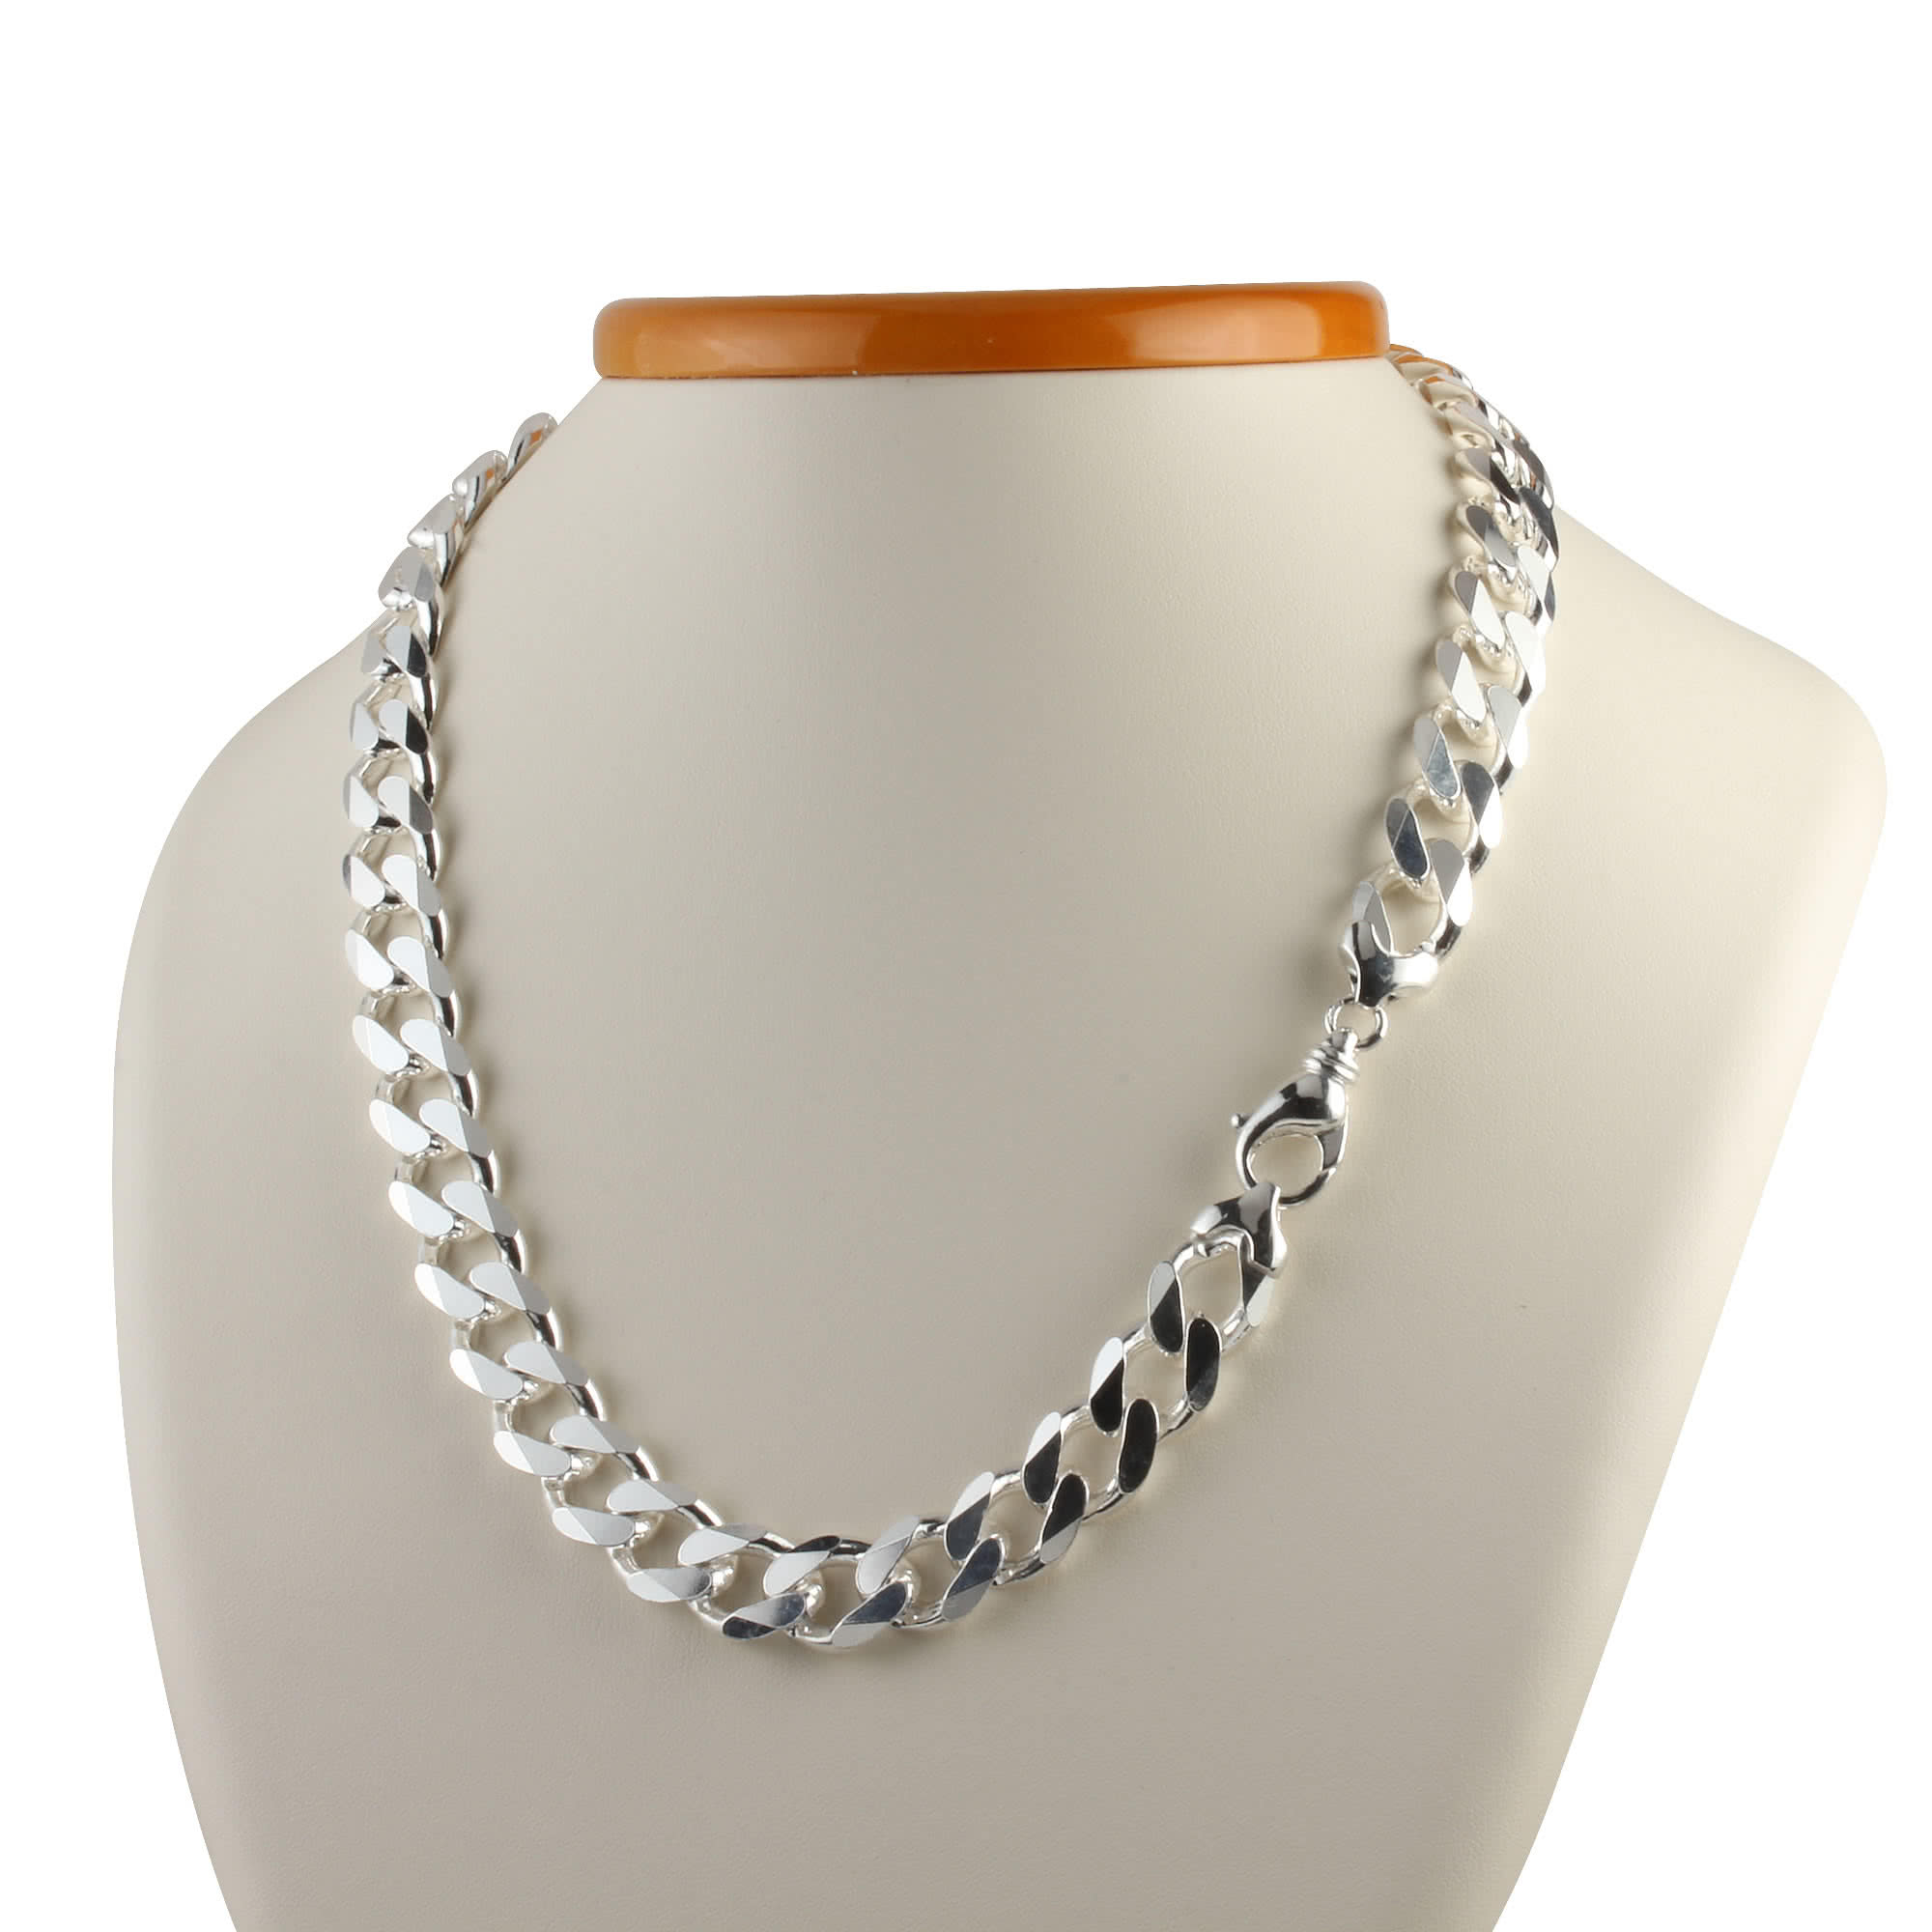 56 CM STERLING SILVER 925 STRONG FINE CURB NECKLACE CHAIN 22" 